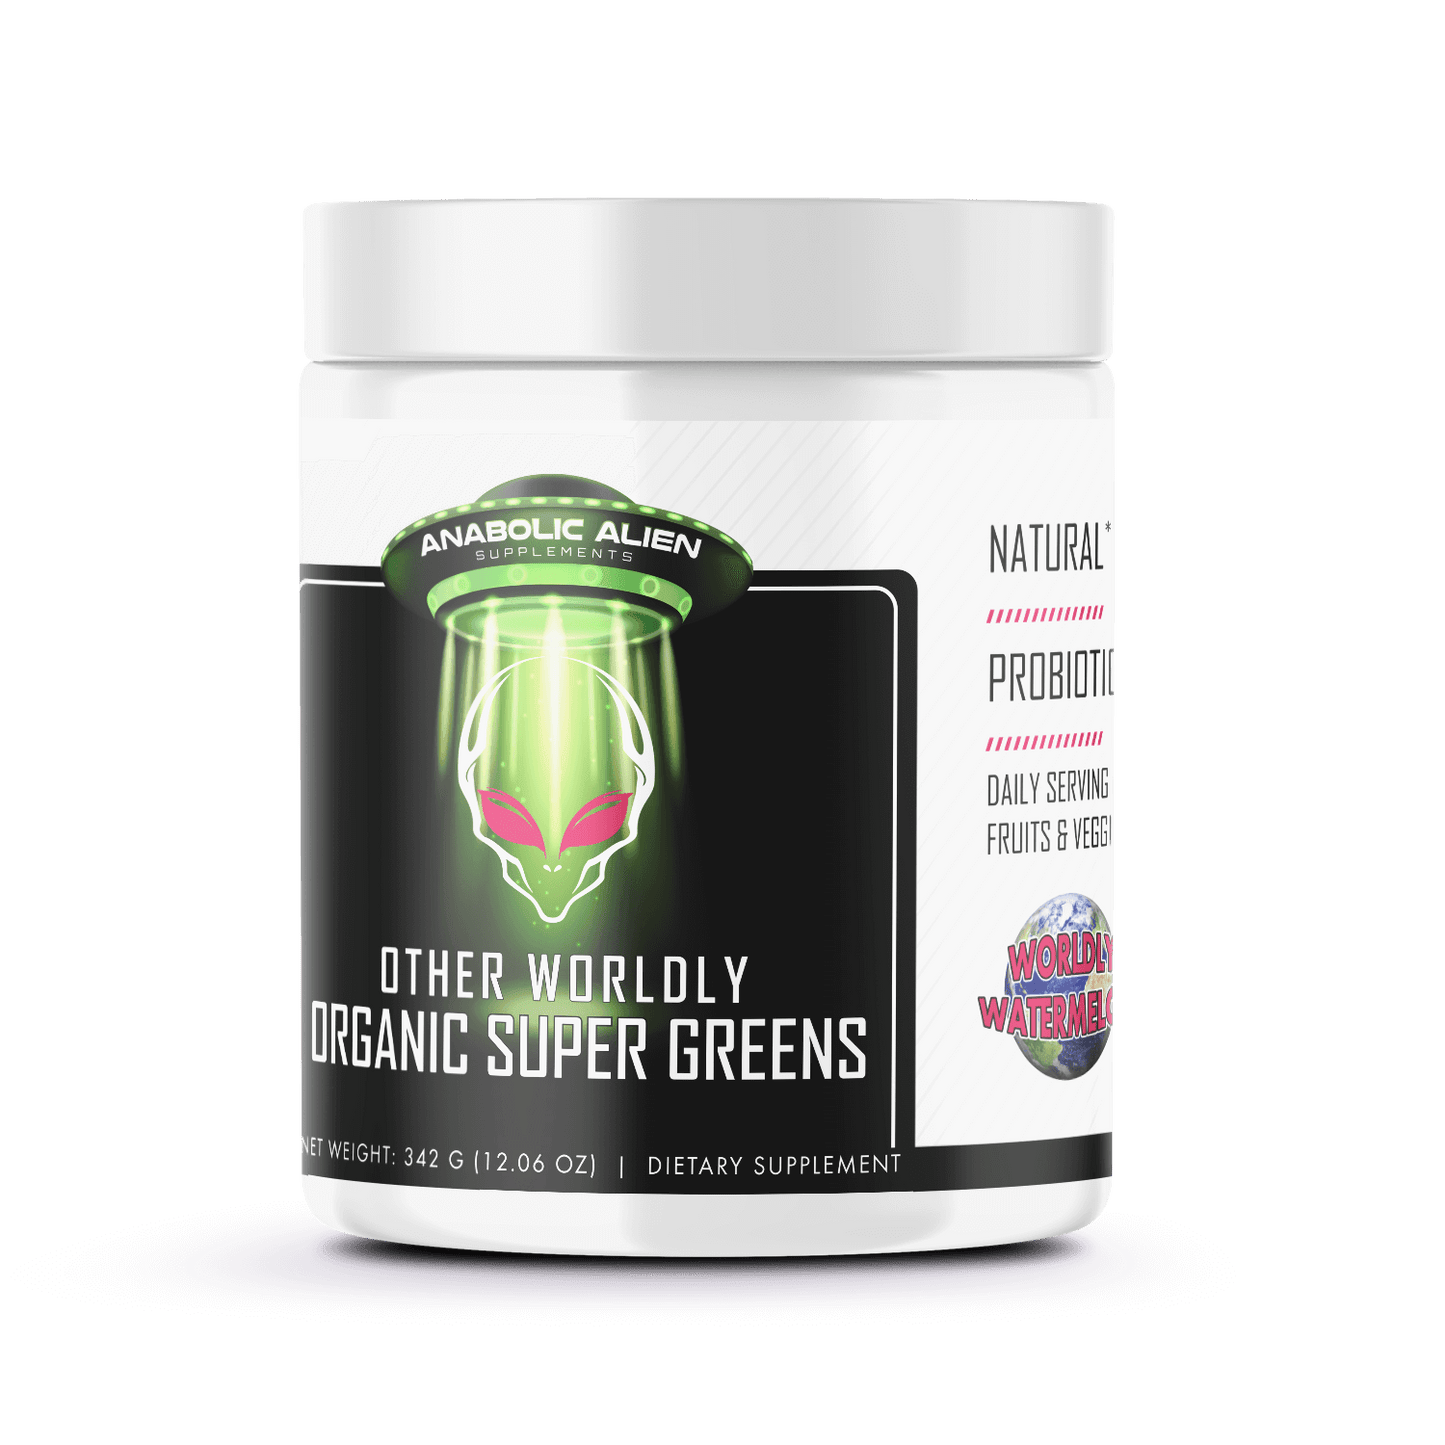 Other Worldly Organic Super Greens